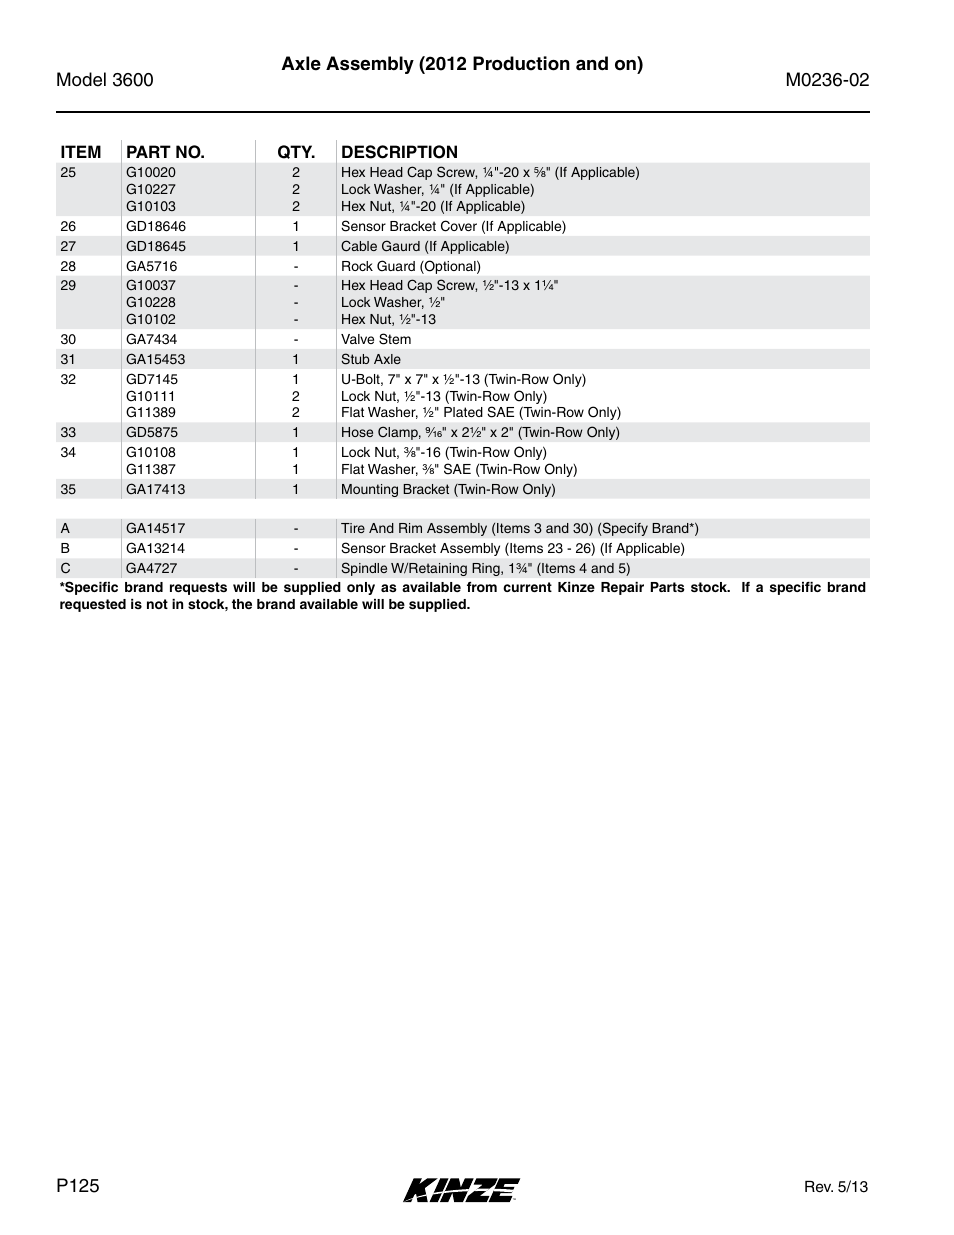 Axle assembly (2012 production and on) | Kinze 3600 Lift and Rotate Planter Rev. 5/14 User Manual | Page 128 / 302